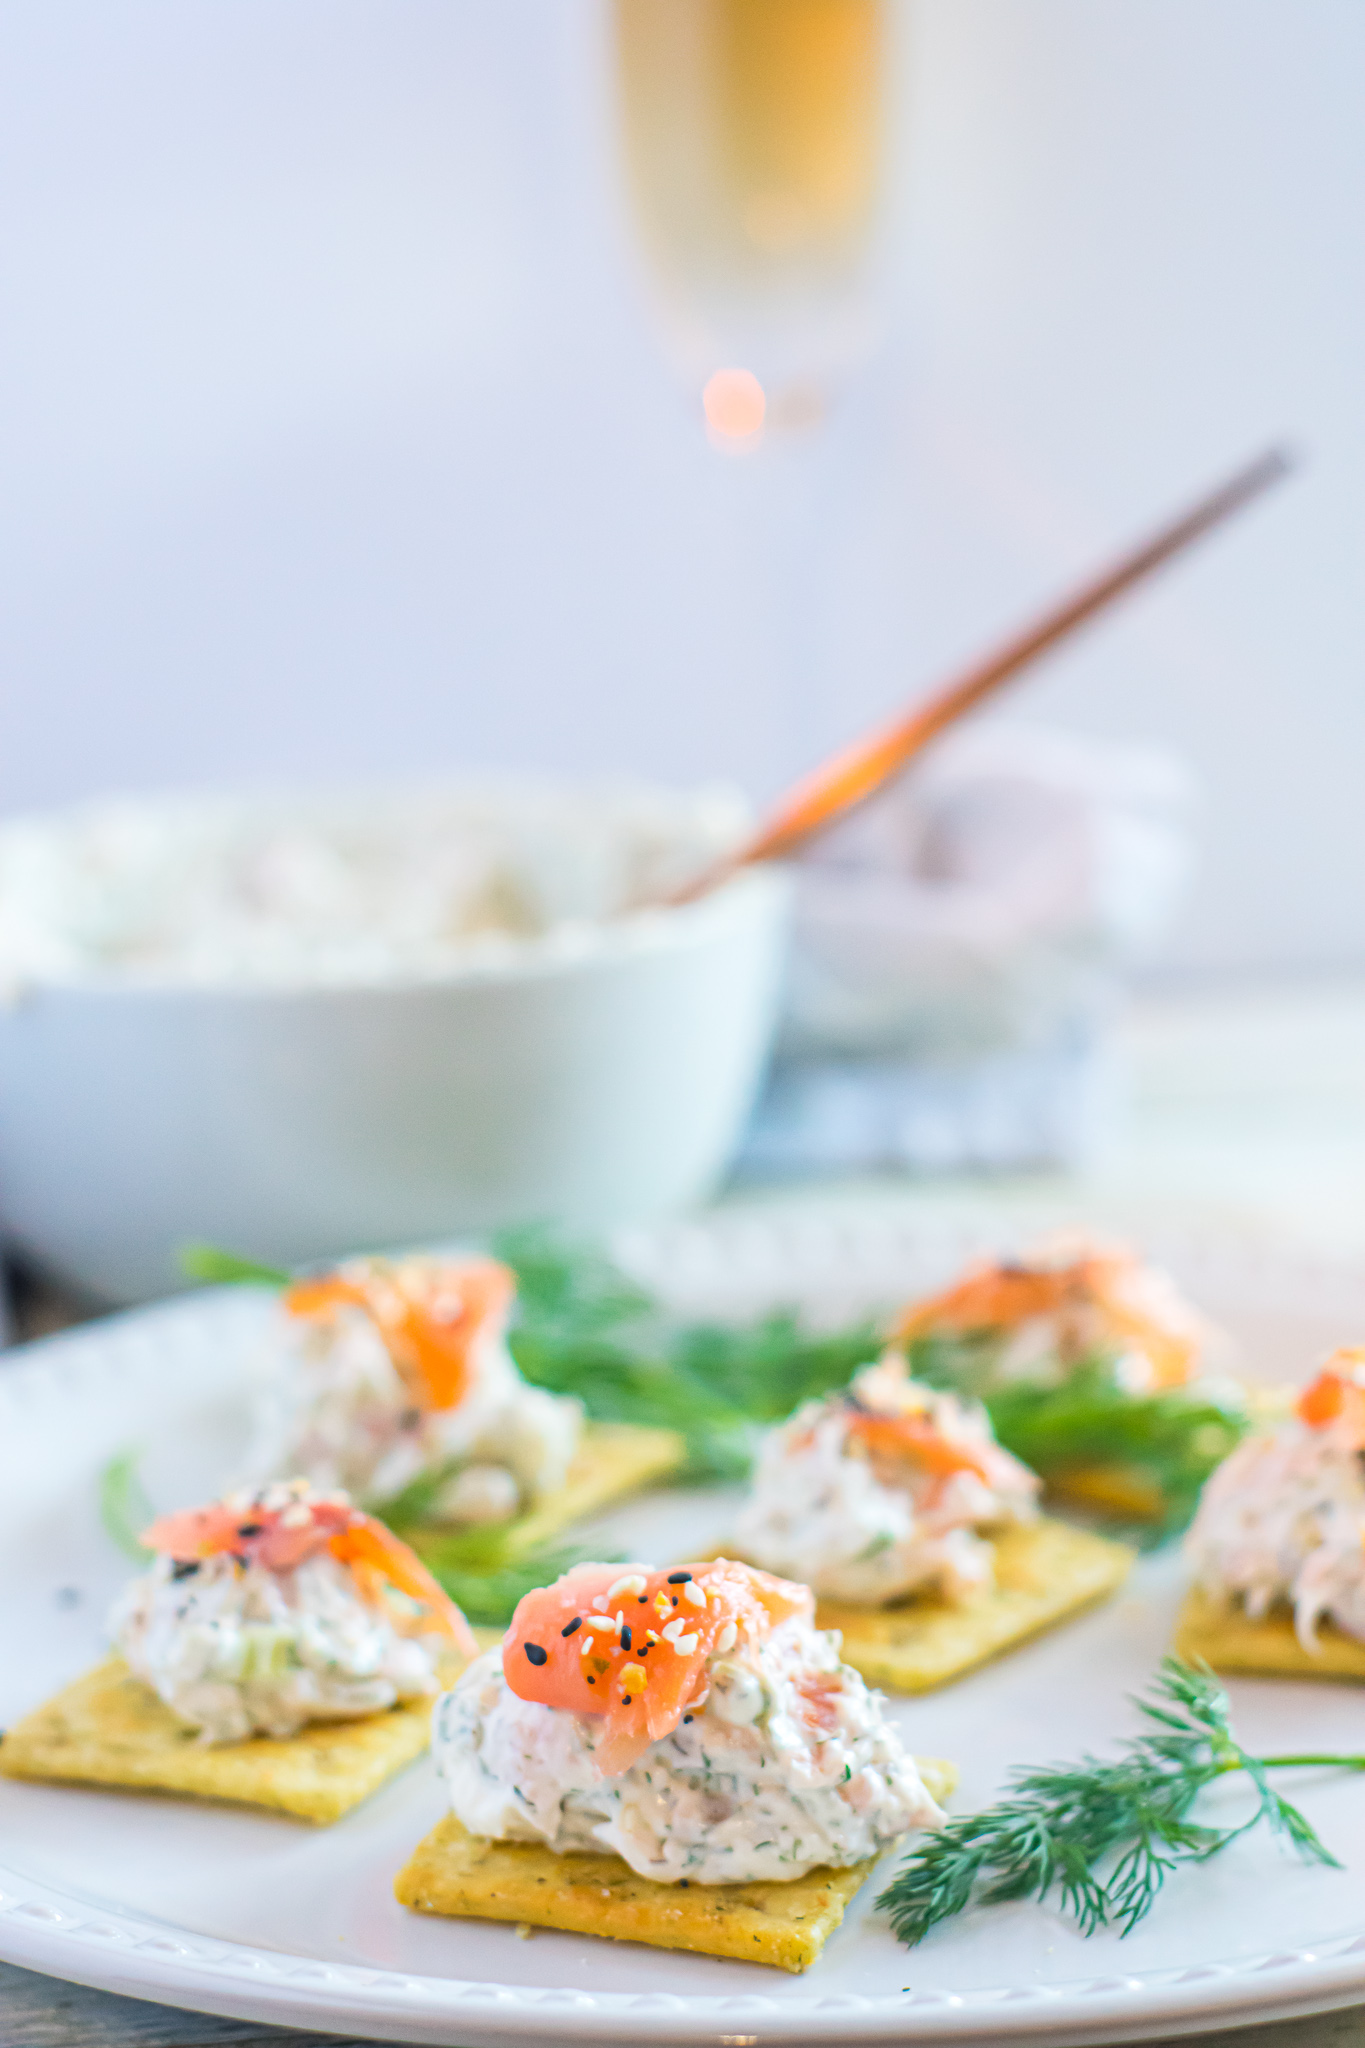 Smoked salmon dip with crackers on a white plate with dill garnishment.